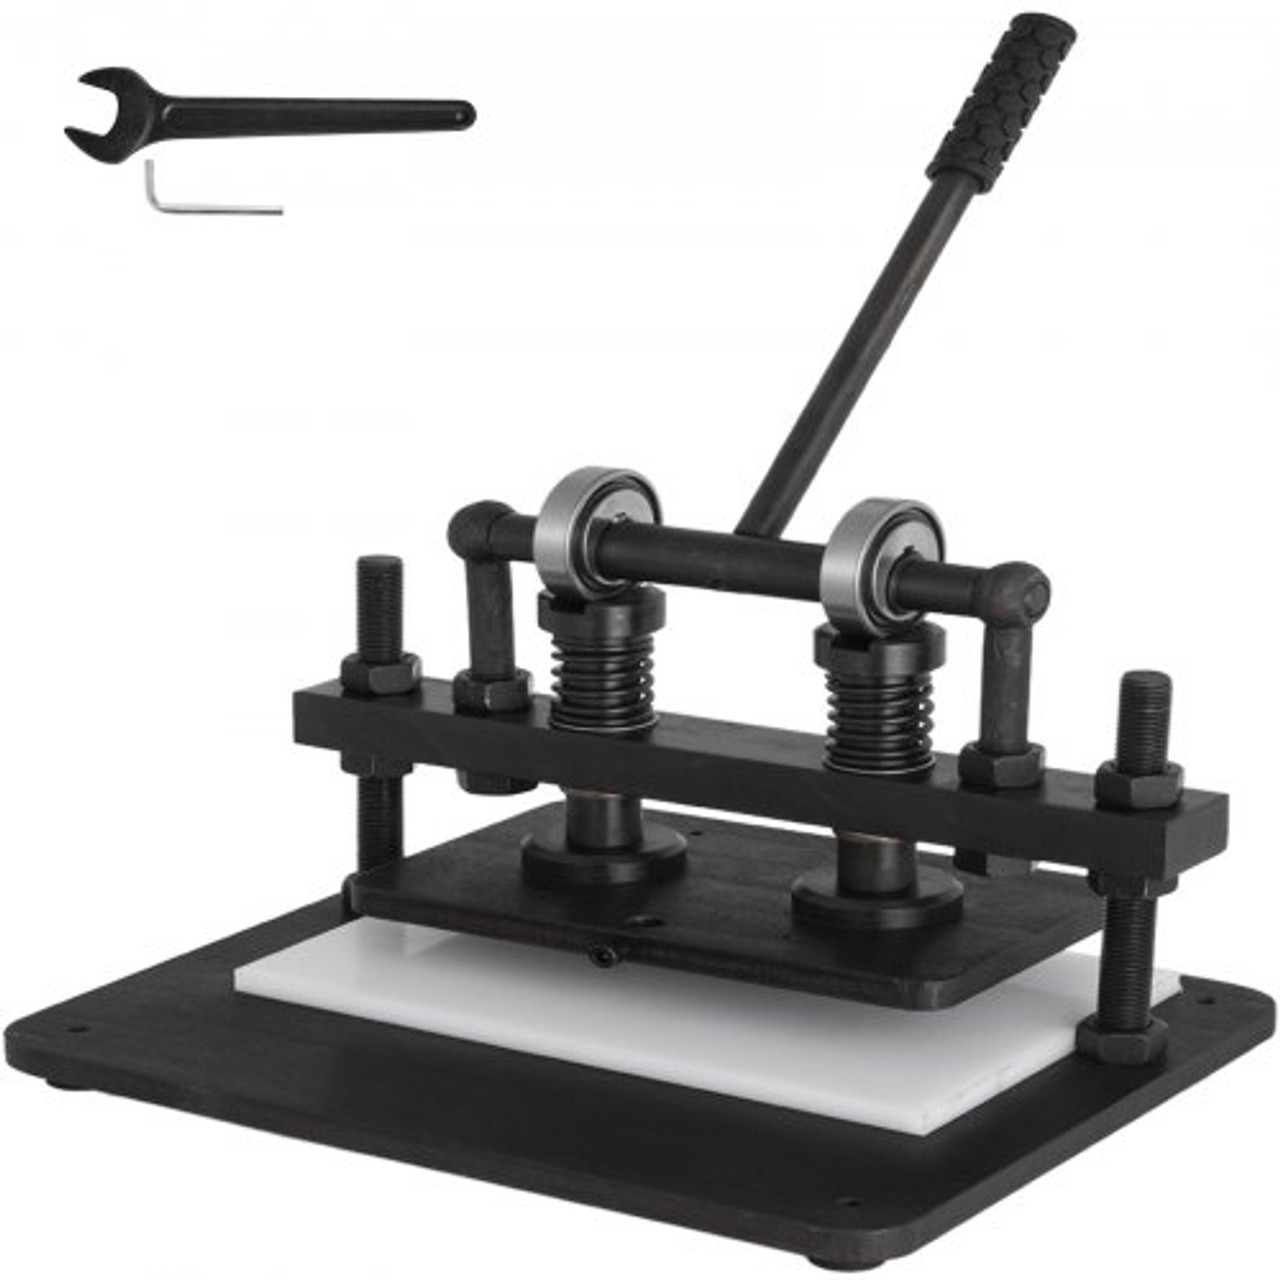 Leather Cutting Machine Black Manual Leather Embossing Machine 260x150 mm Upper Platen Manual Leathercraft Cutting Machine for Various of Materials